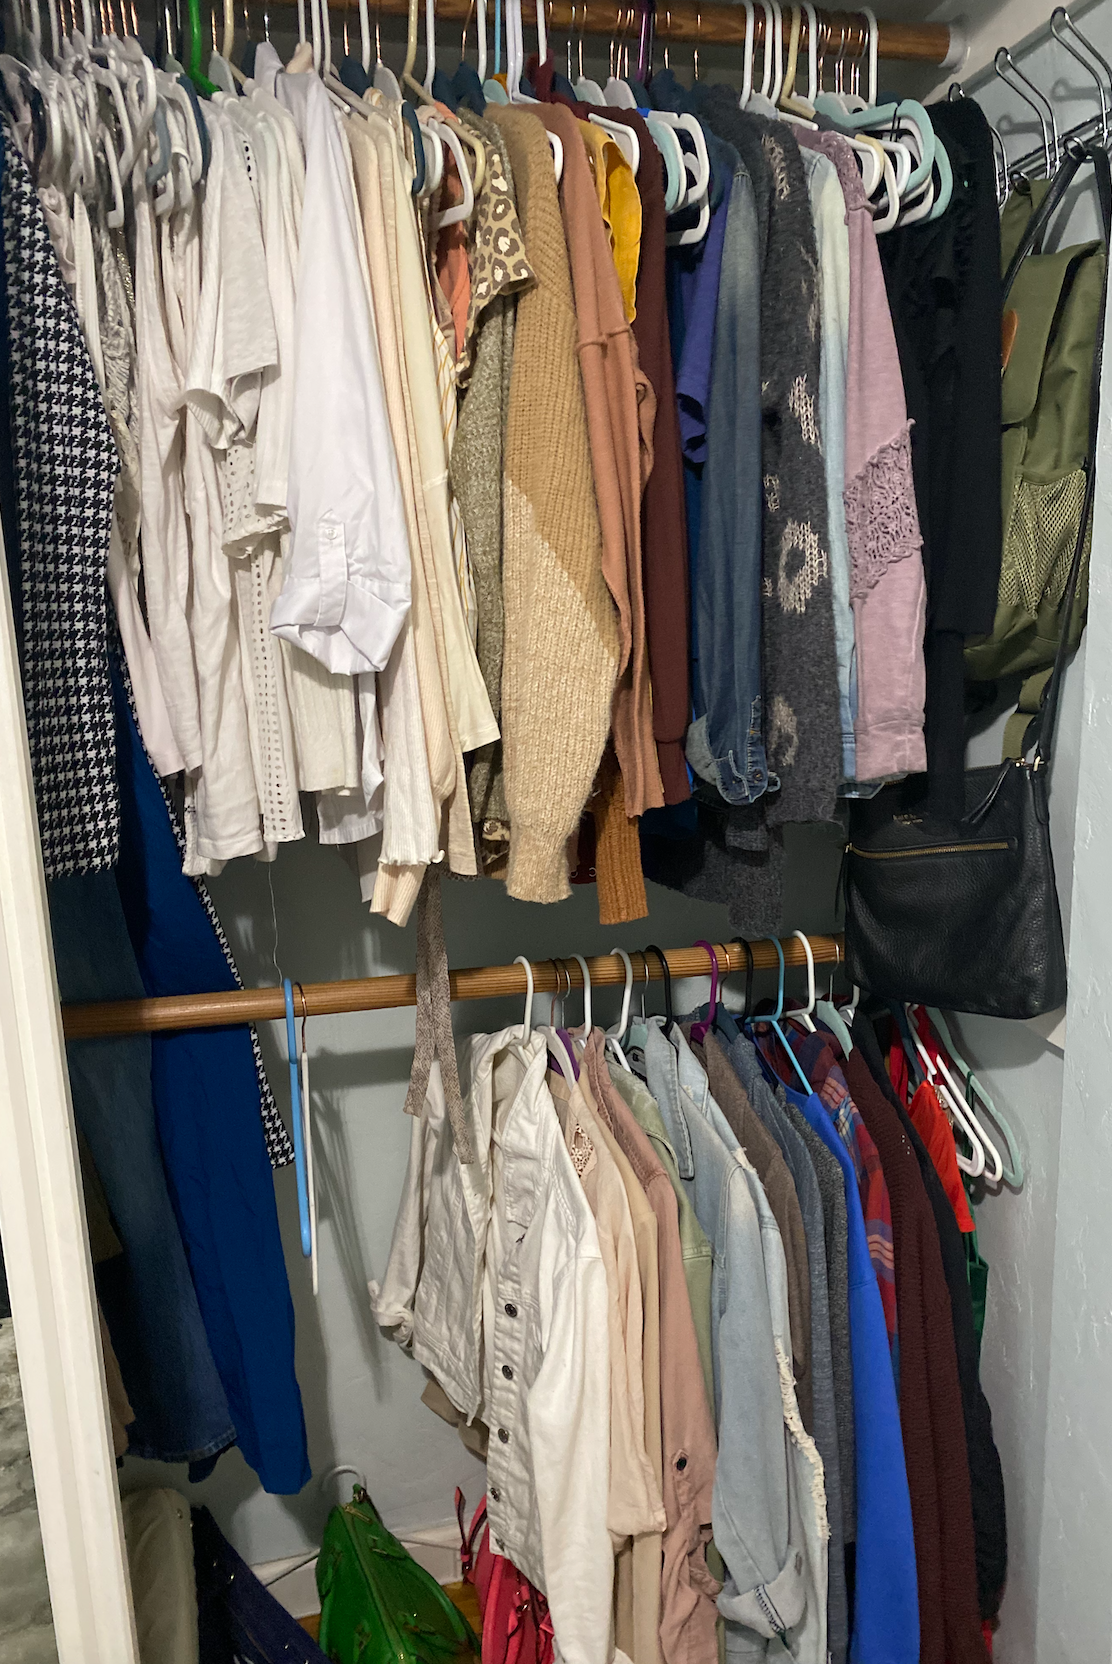 Shirts, sweaters, and other tops hanging in a two-level closet